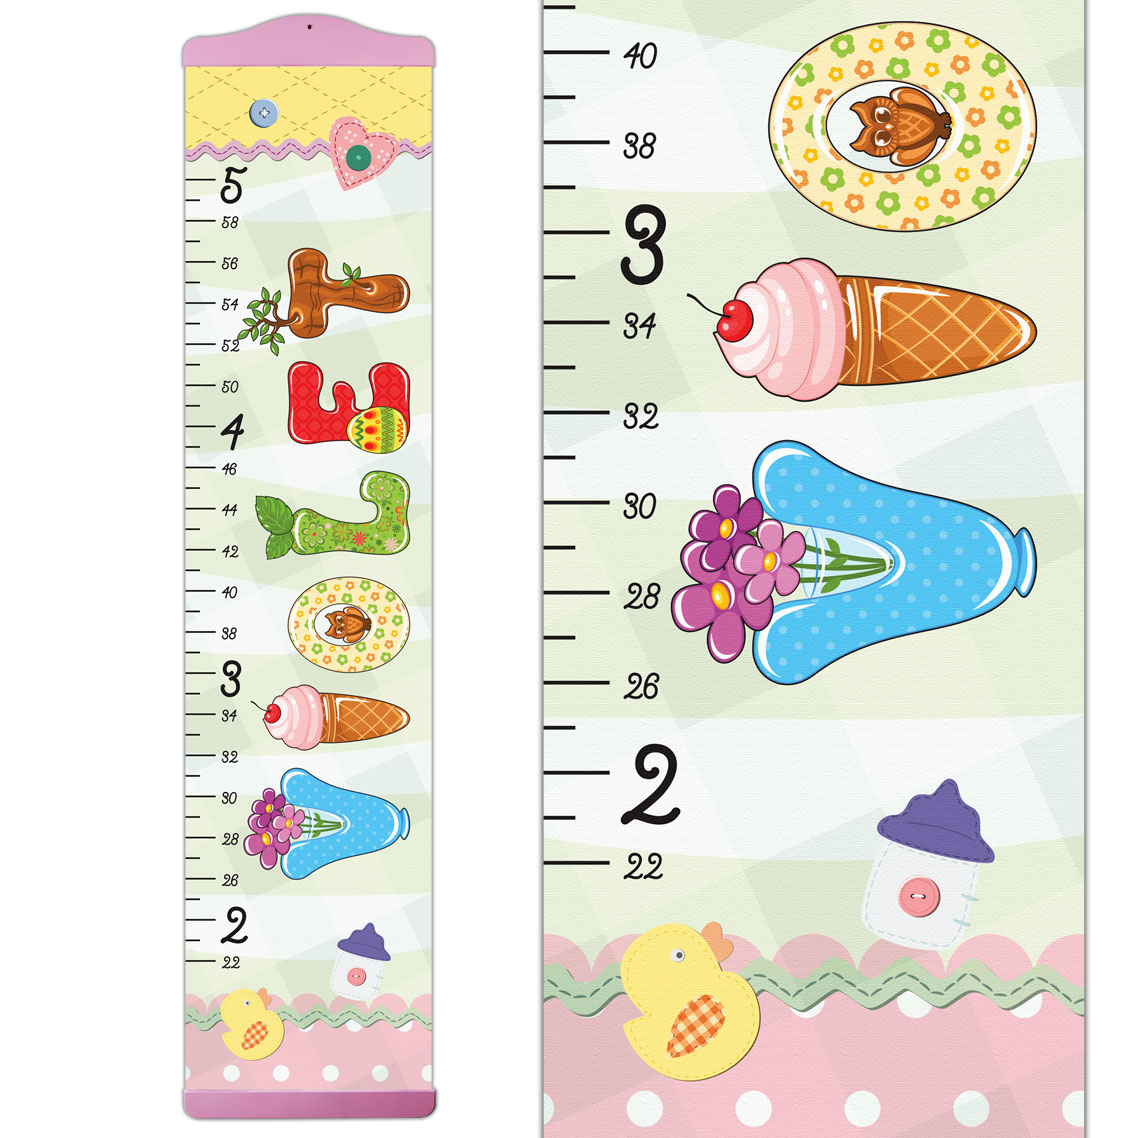 Original Letter Design Growth Chart in Canvas